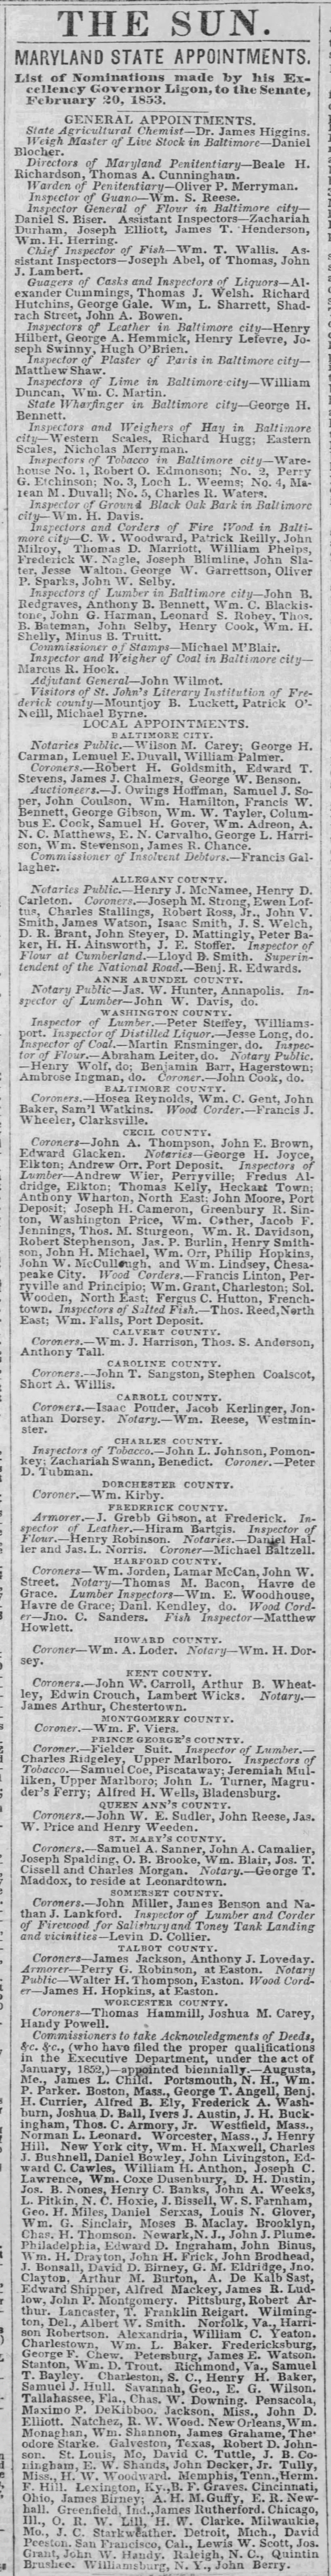 Maryland State Appointments; 23 Feb 1854; The Baltimore Sun; 1